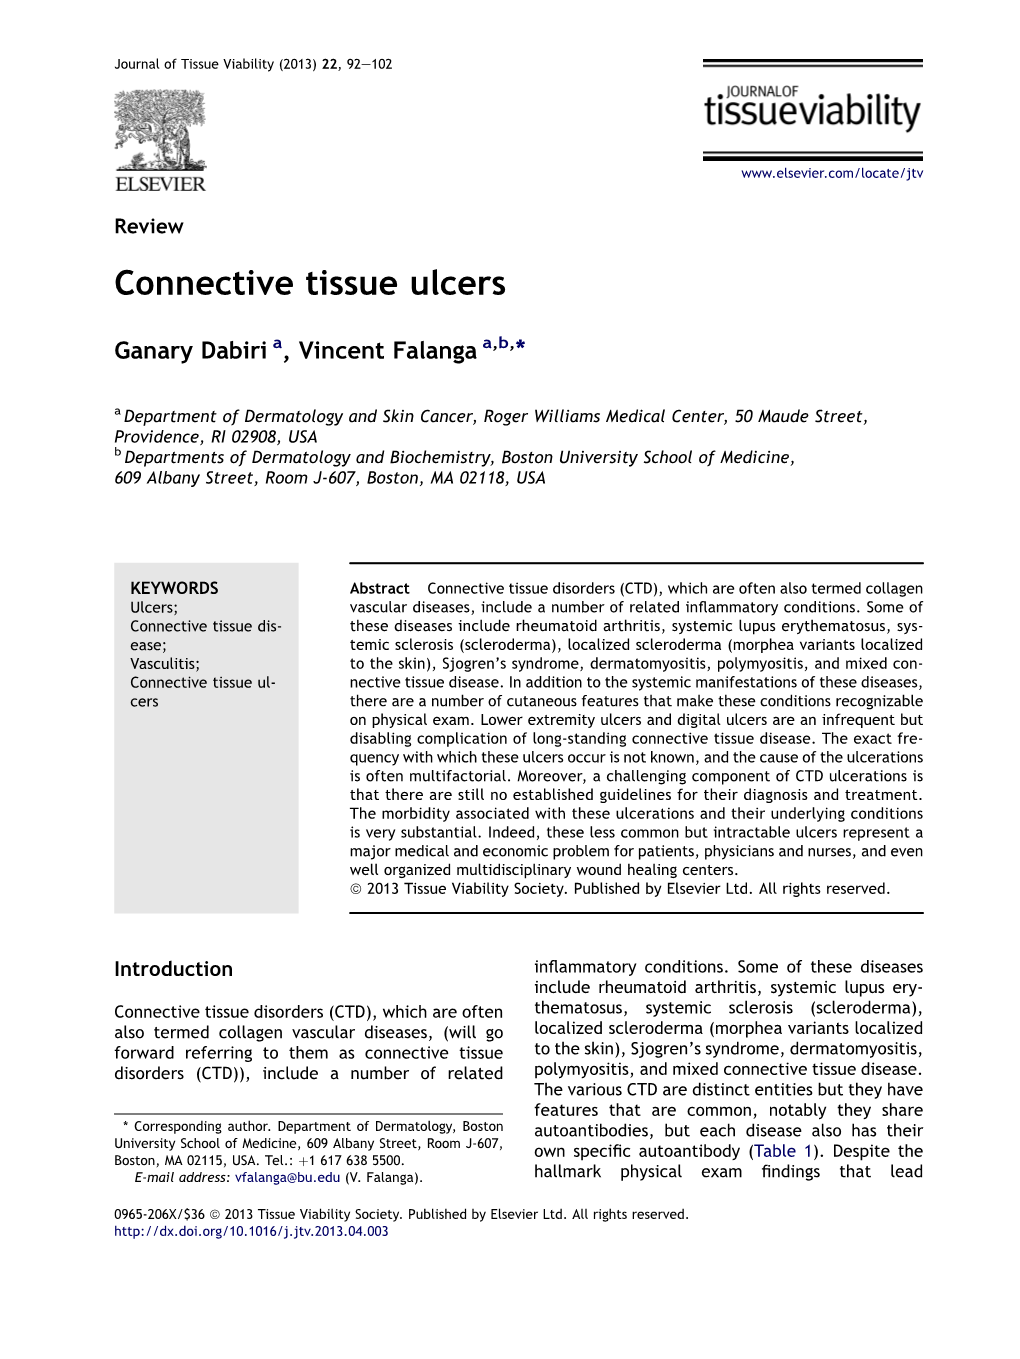 Connective Tissue Ulcers